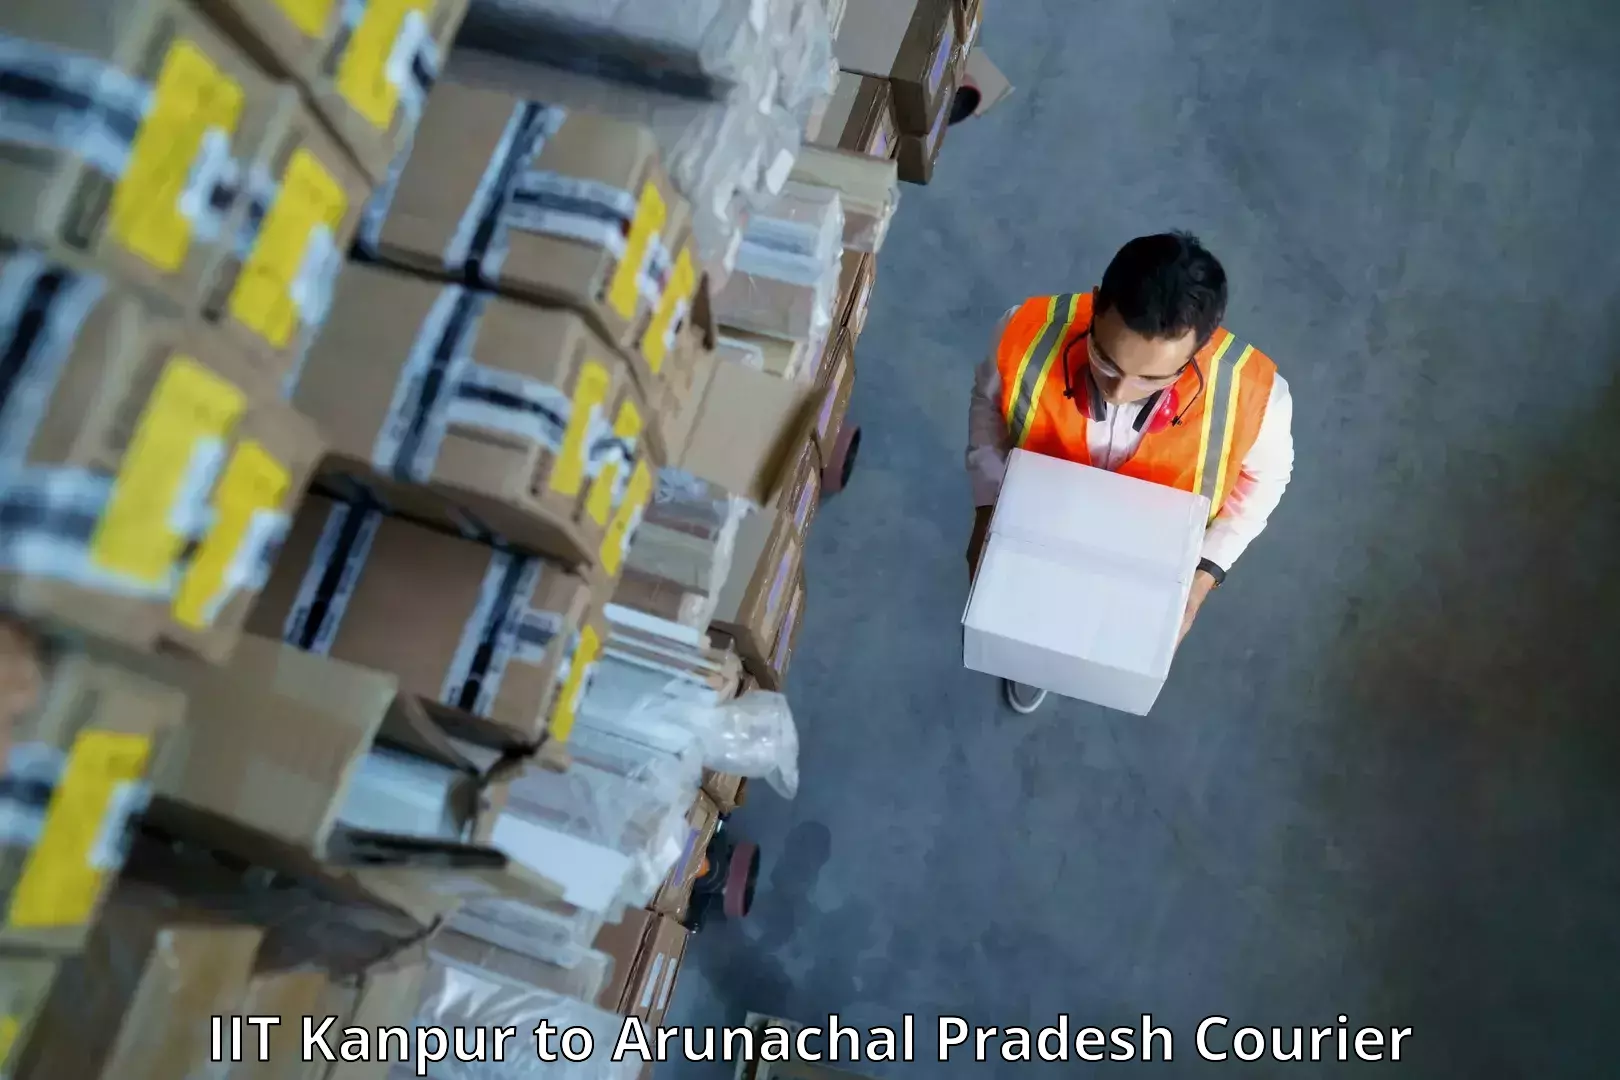 User-friendly delivery service IIT Kanpur to Tezu